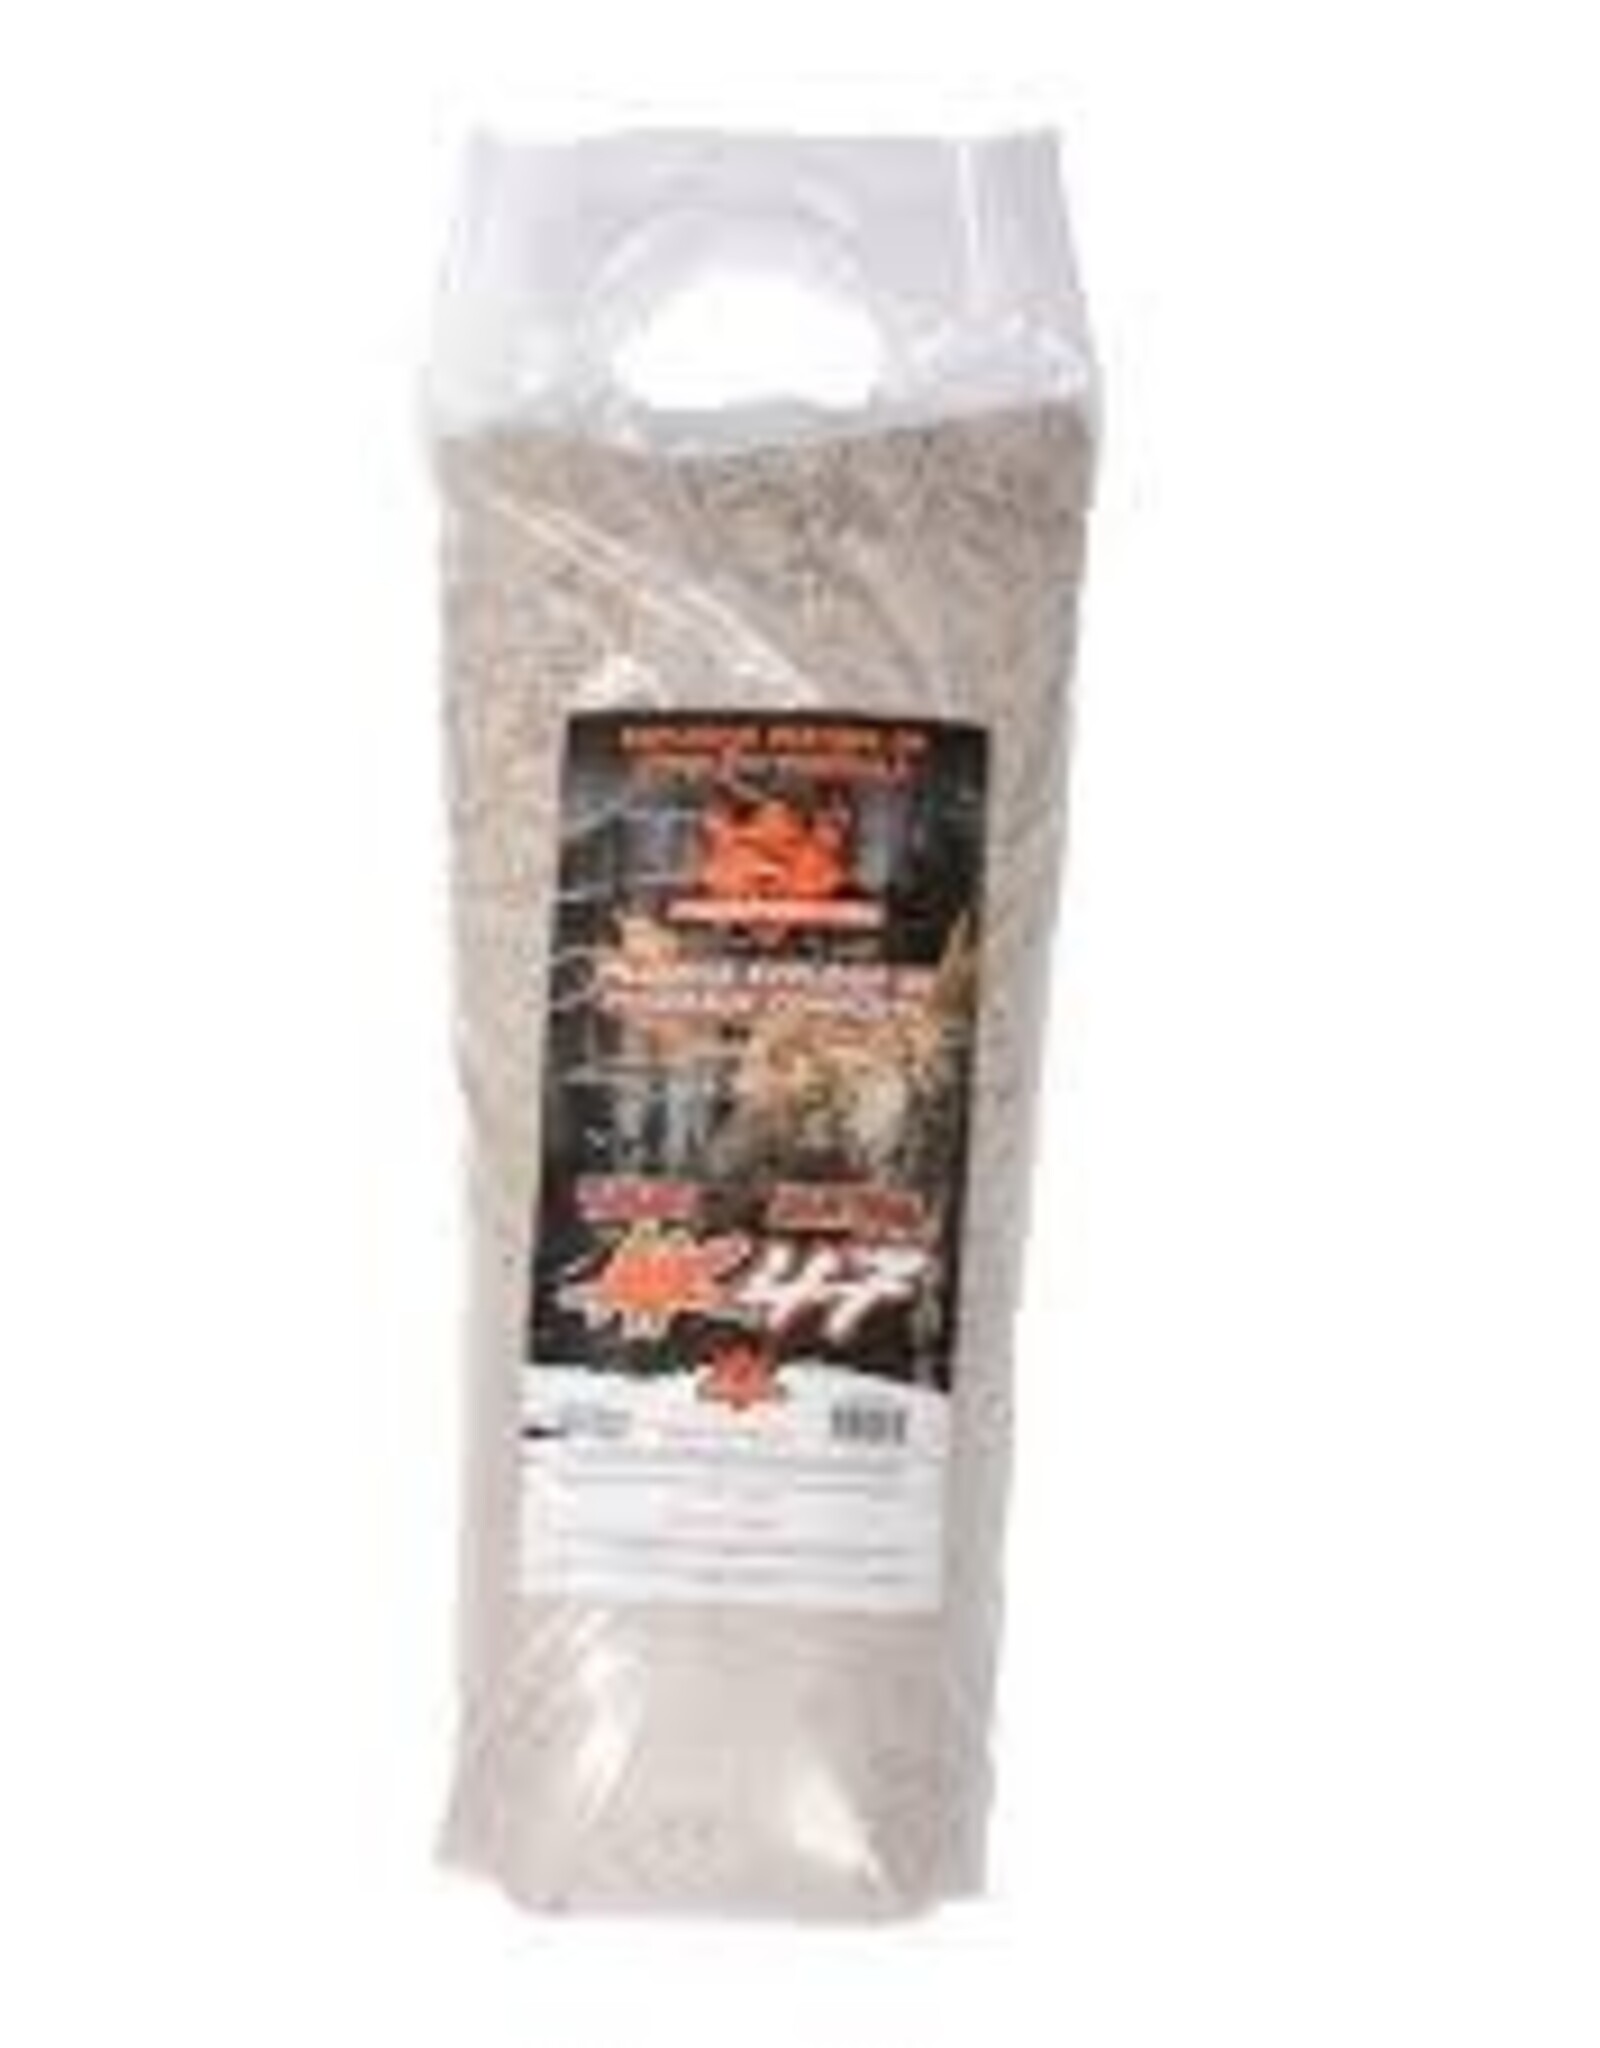 ProXpedition Mineral Lick SeaWeed 6 KG